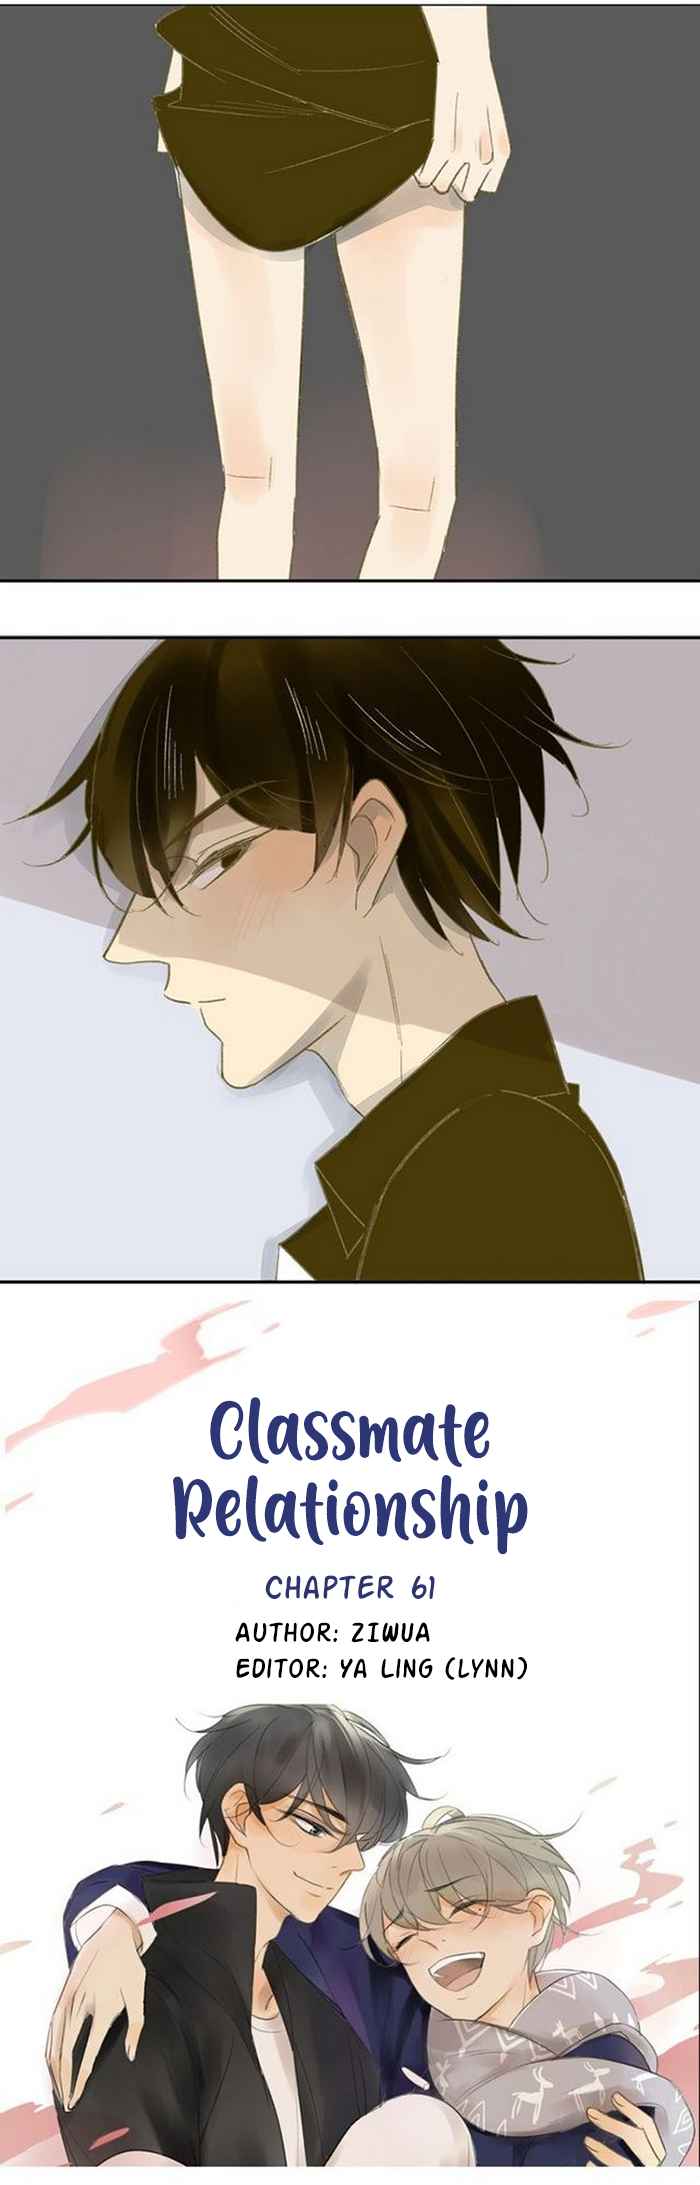 Classmate Relationship? Ch. 61 What does he want to say?